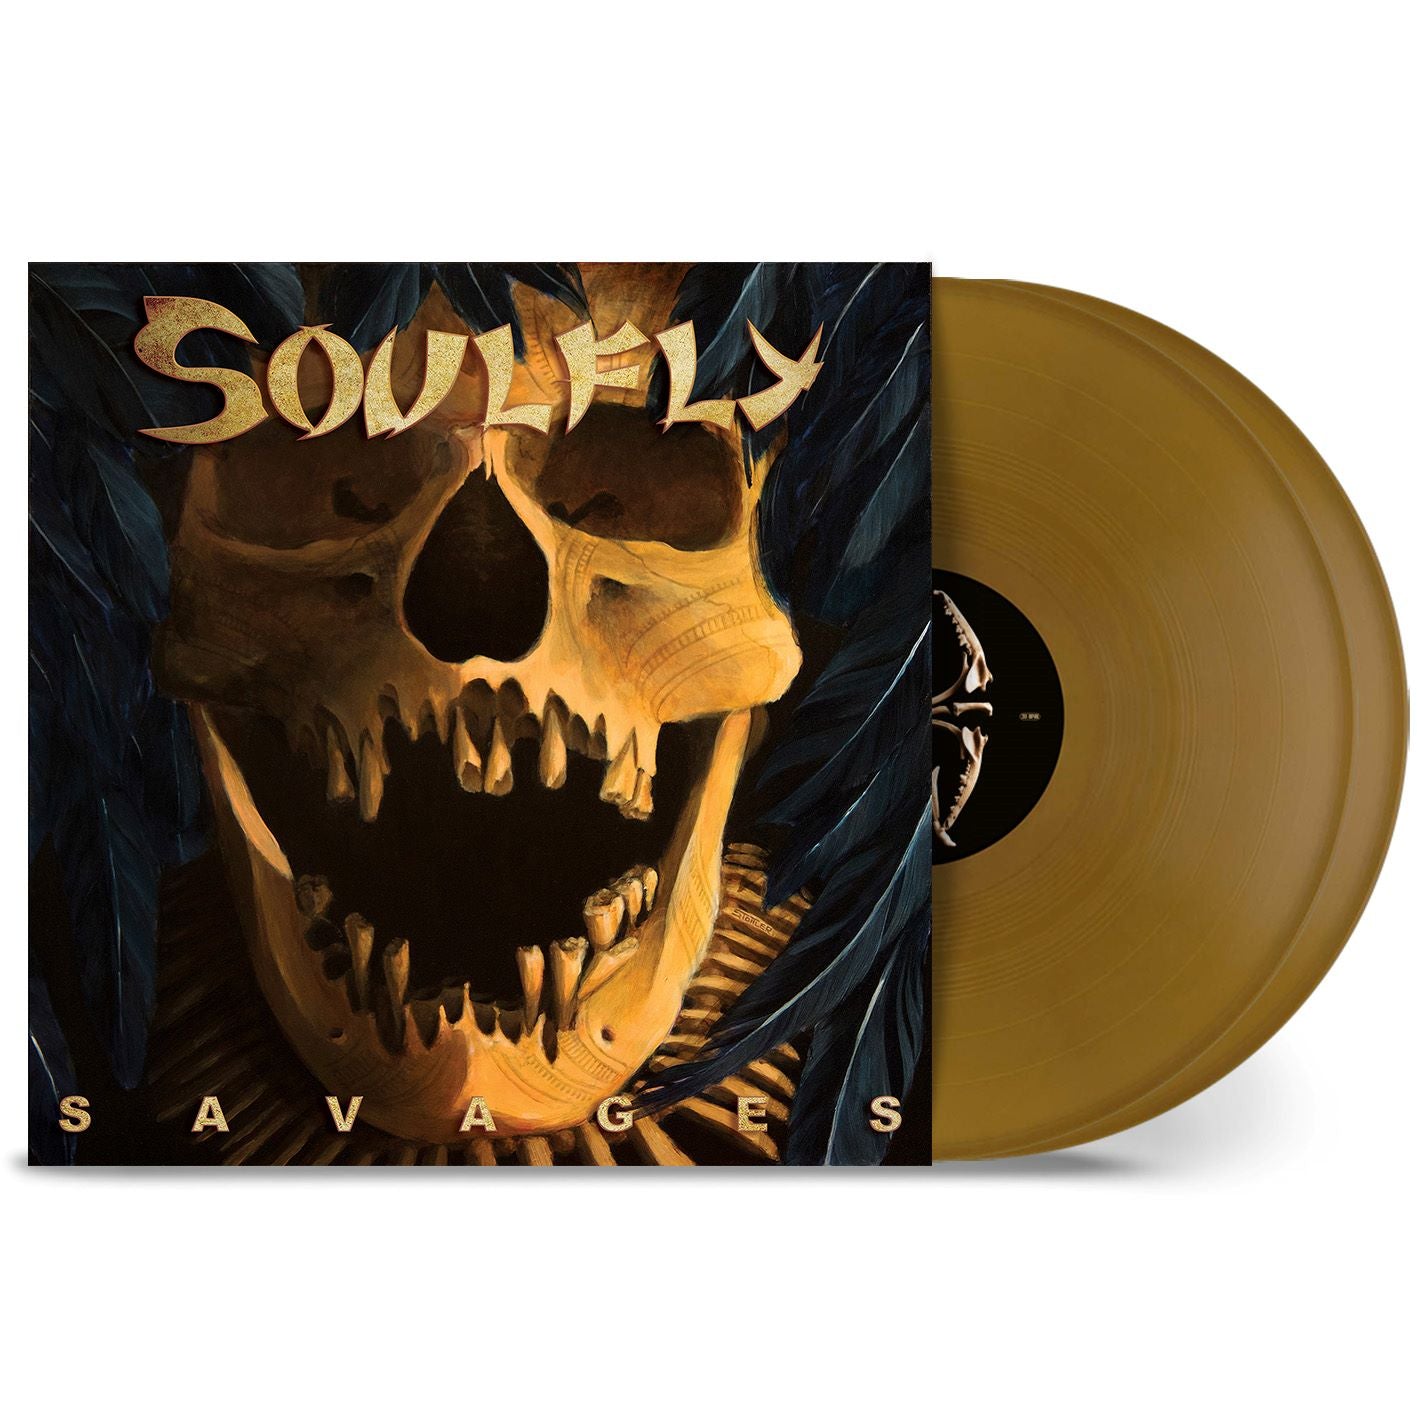 Soulfly "Savages" 2x12" Gold Vinyl